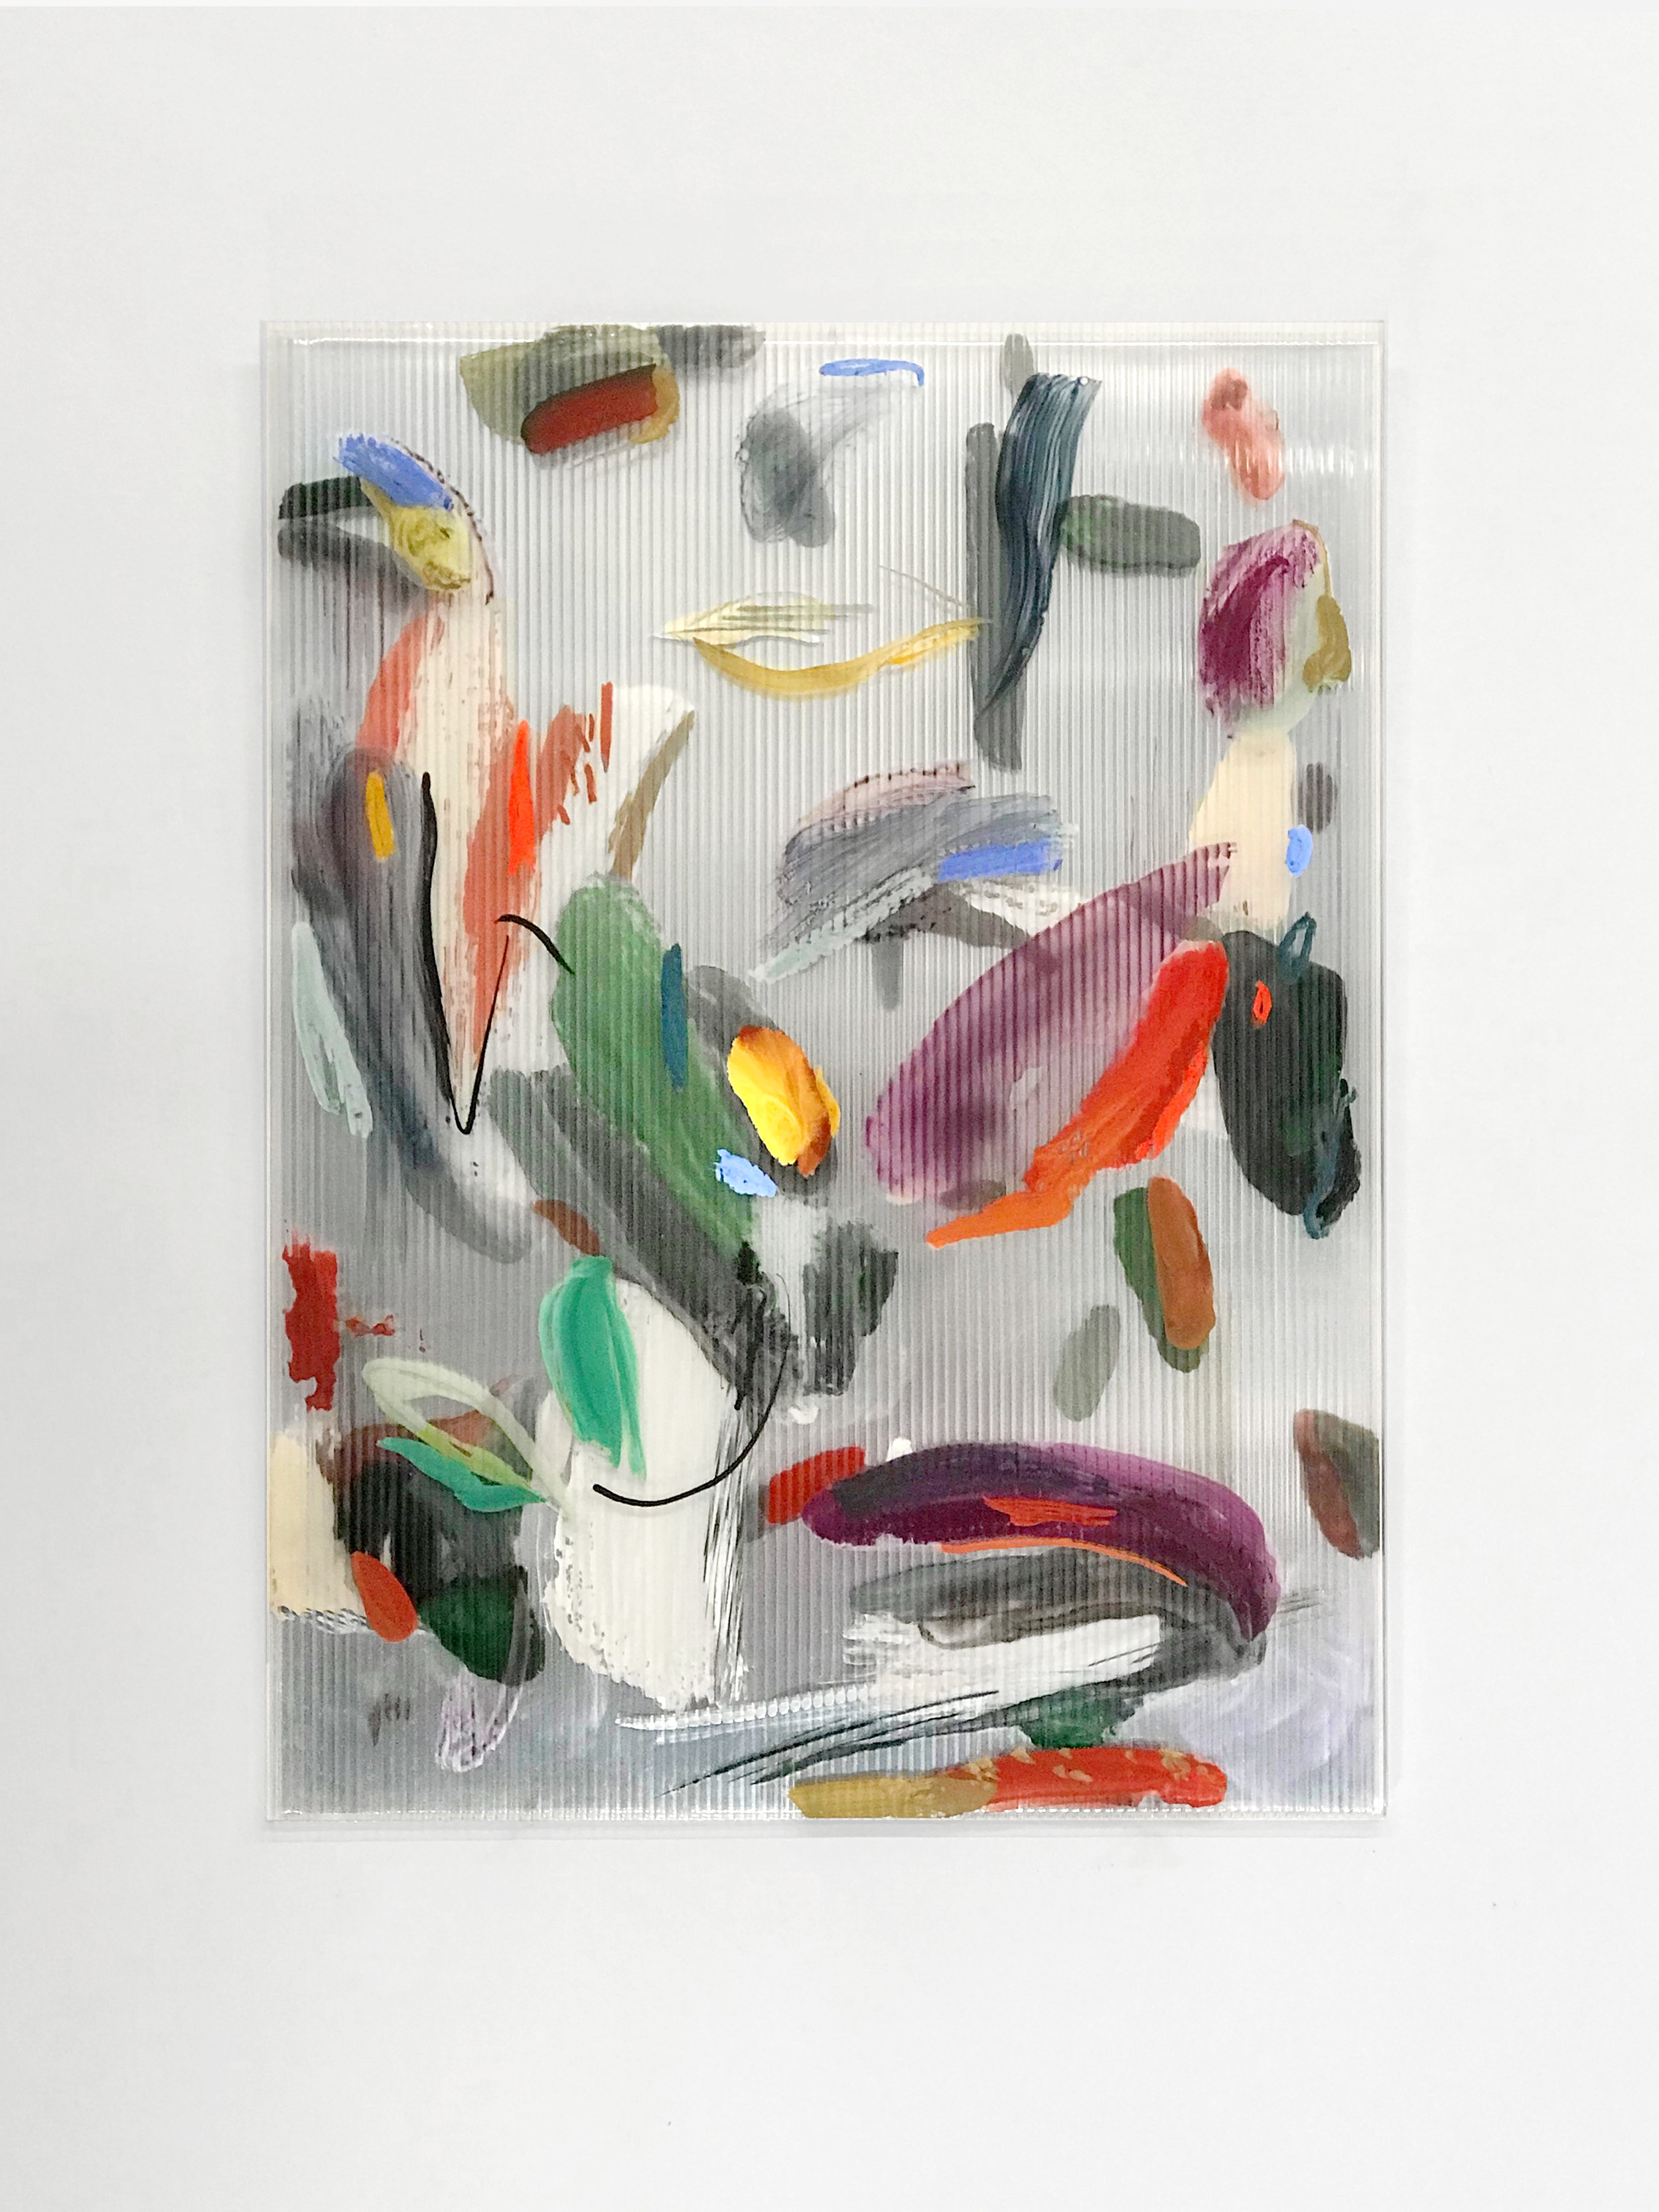 Galerie Isabelle Gounod, April 25 - May 25, 2019